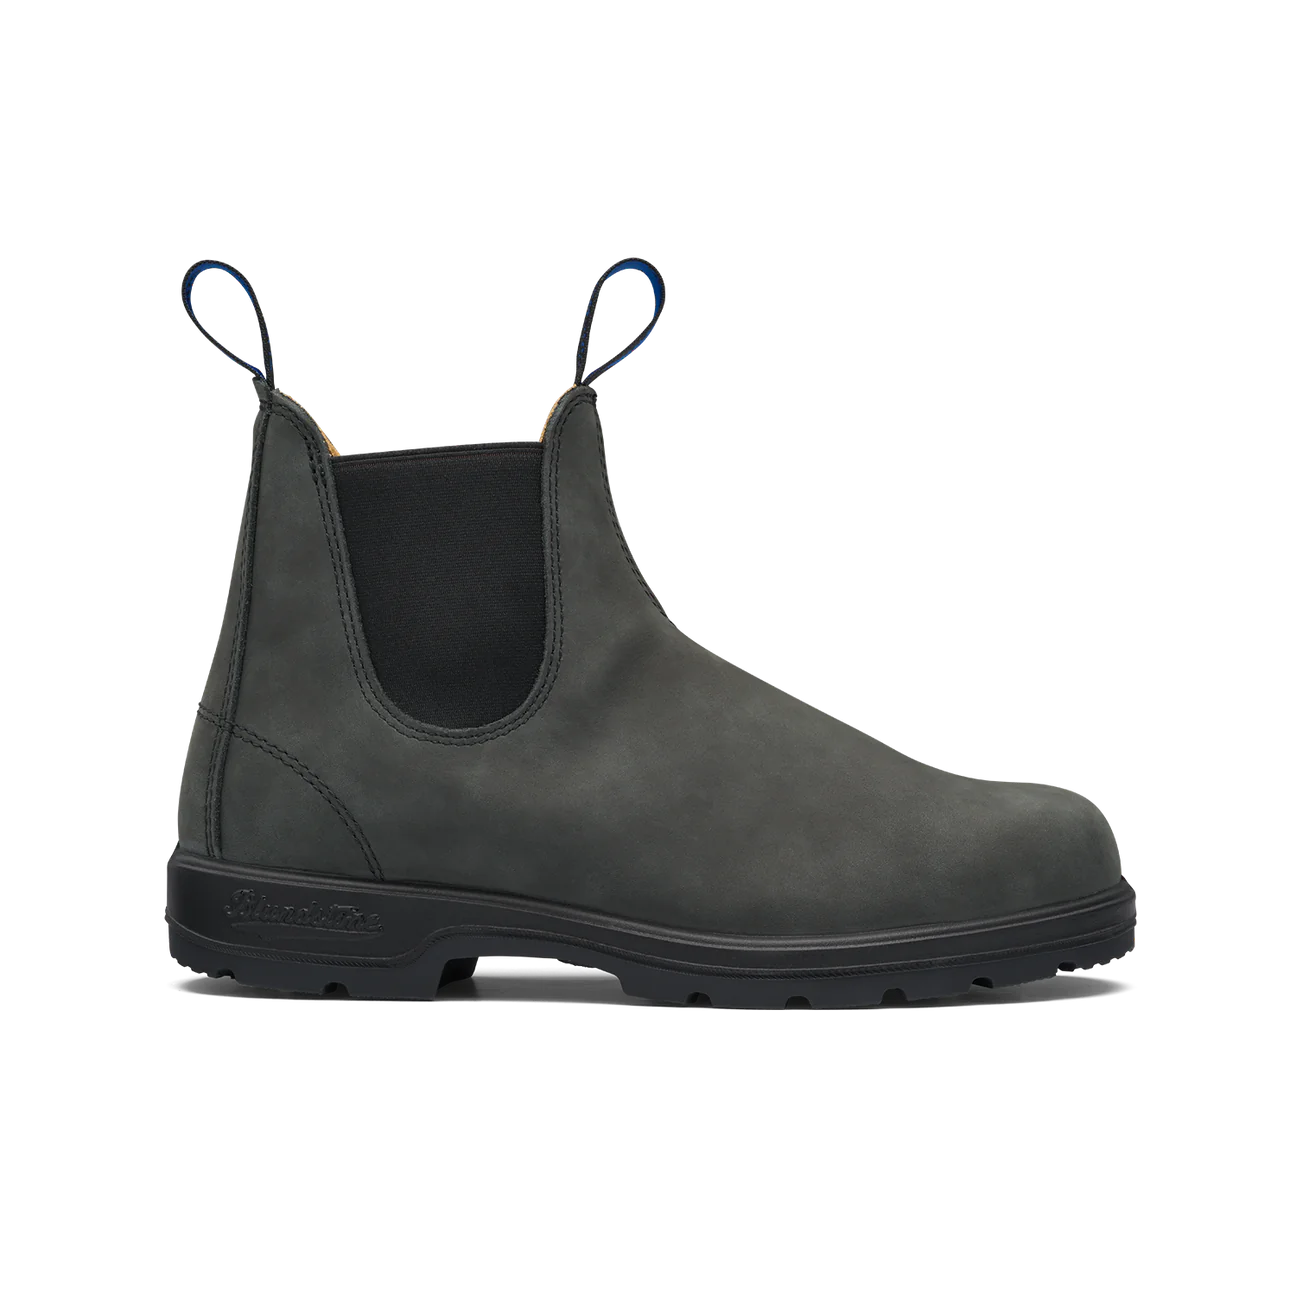 Blundstone 1478 Winter Thermal Classic Boots